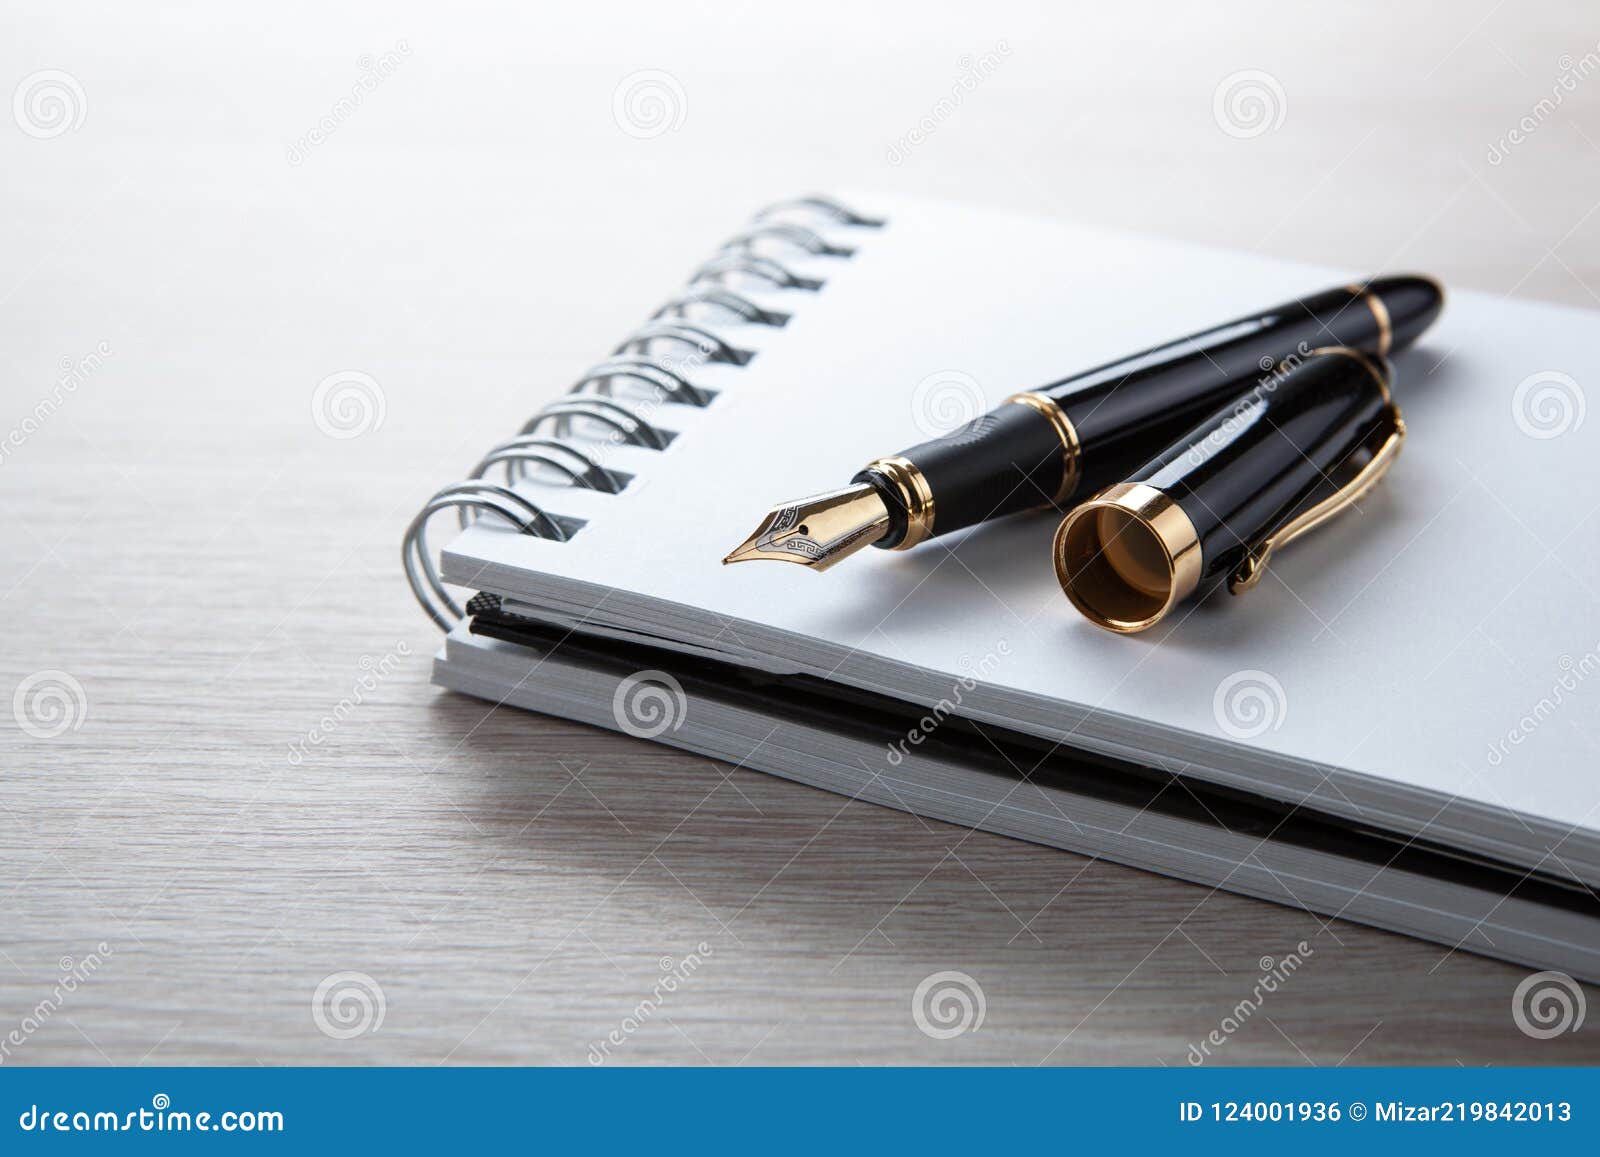 Fountain Pen On The Notepad On The Desktop Stock Photo Image Of